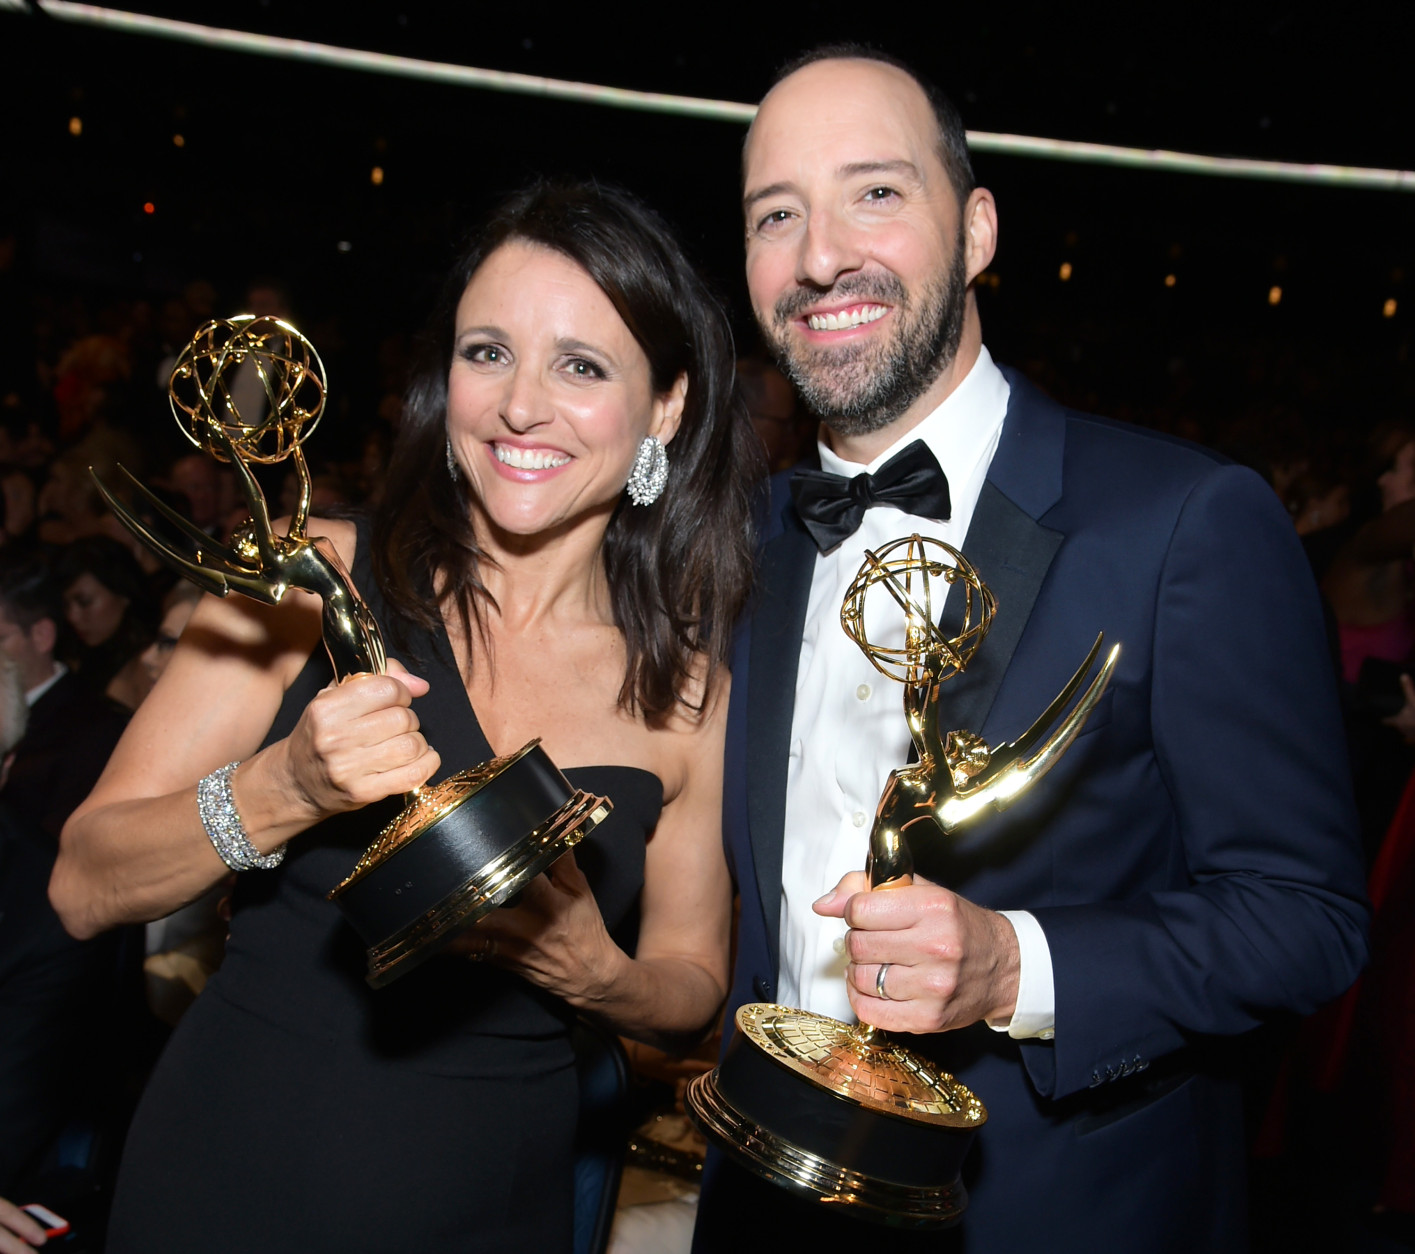 Julia Louis-Dreyfus, winner of the award for outstanding lead actress in a comedy series for "Veep", left, and Tony Hale, winner of award for outstanding supporting actor in a comedy series for Veep, pose at the 67th Primetime Emmy Awards on Sunday, Sept. 20, 2015, at the Microsoft Theater in Los Angeles. (Photo by Charles Sykes/Invision for the Television Academy/AP Images)